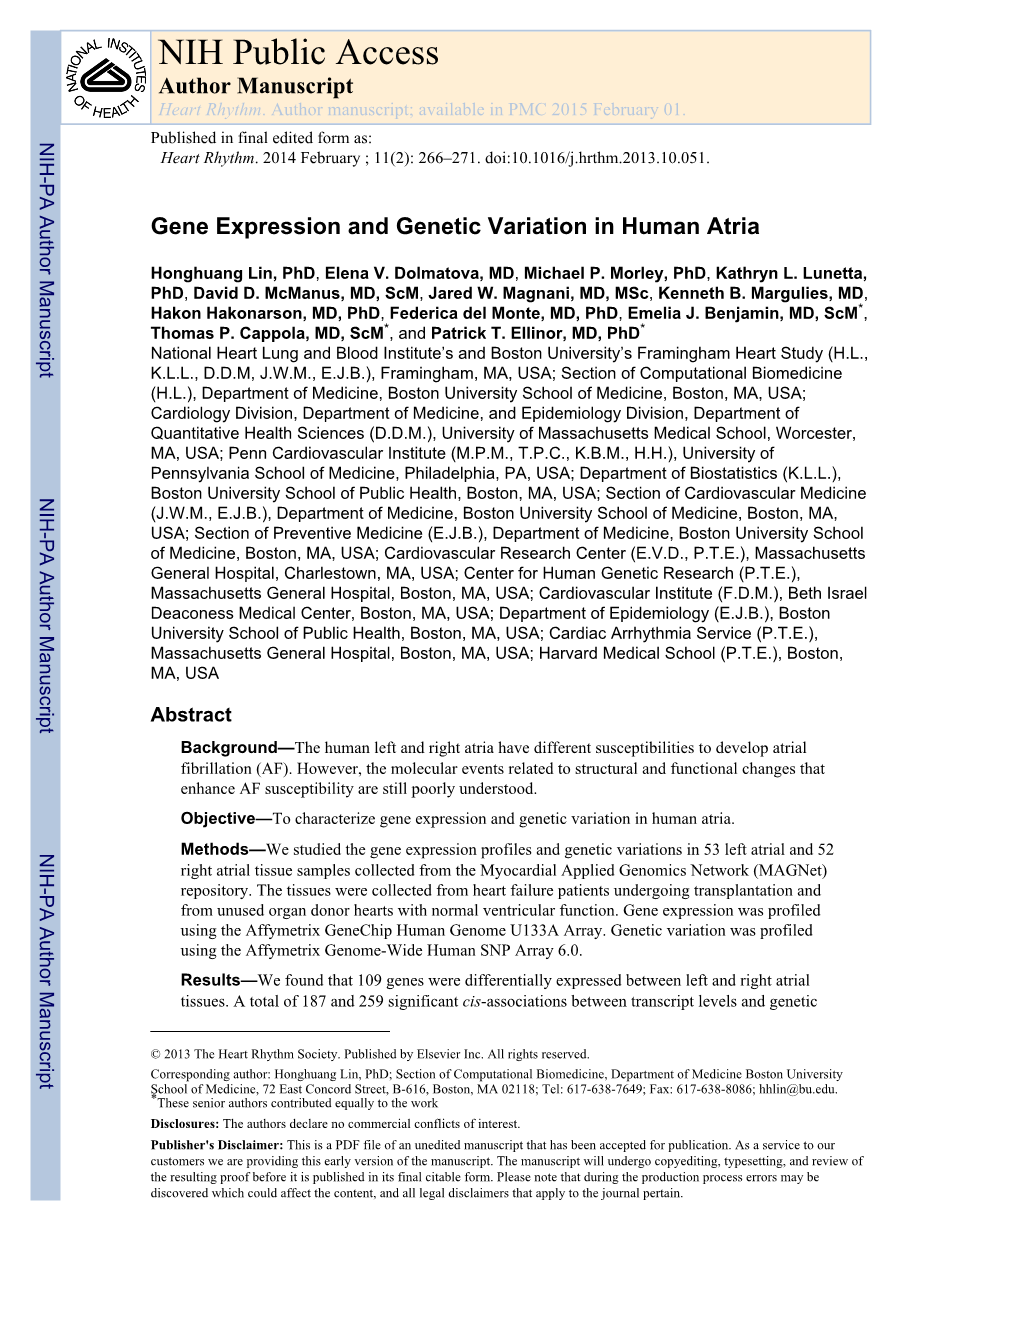 Gene Expression and Genetic Variation in Human Atria